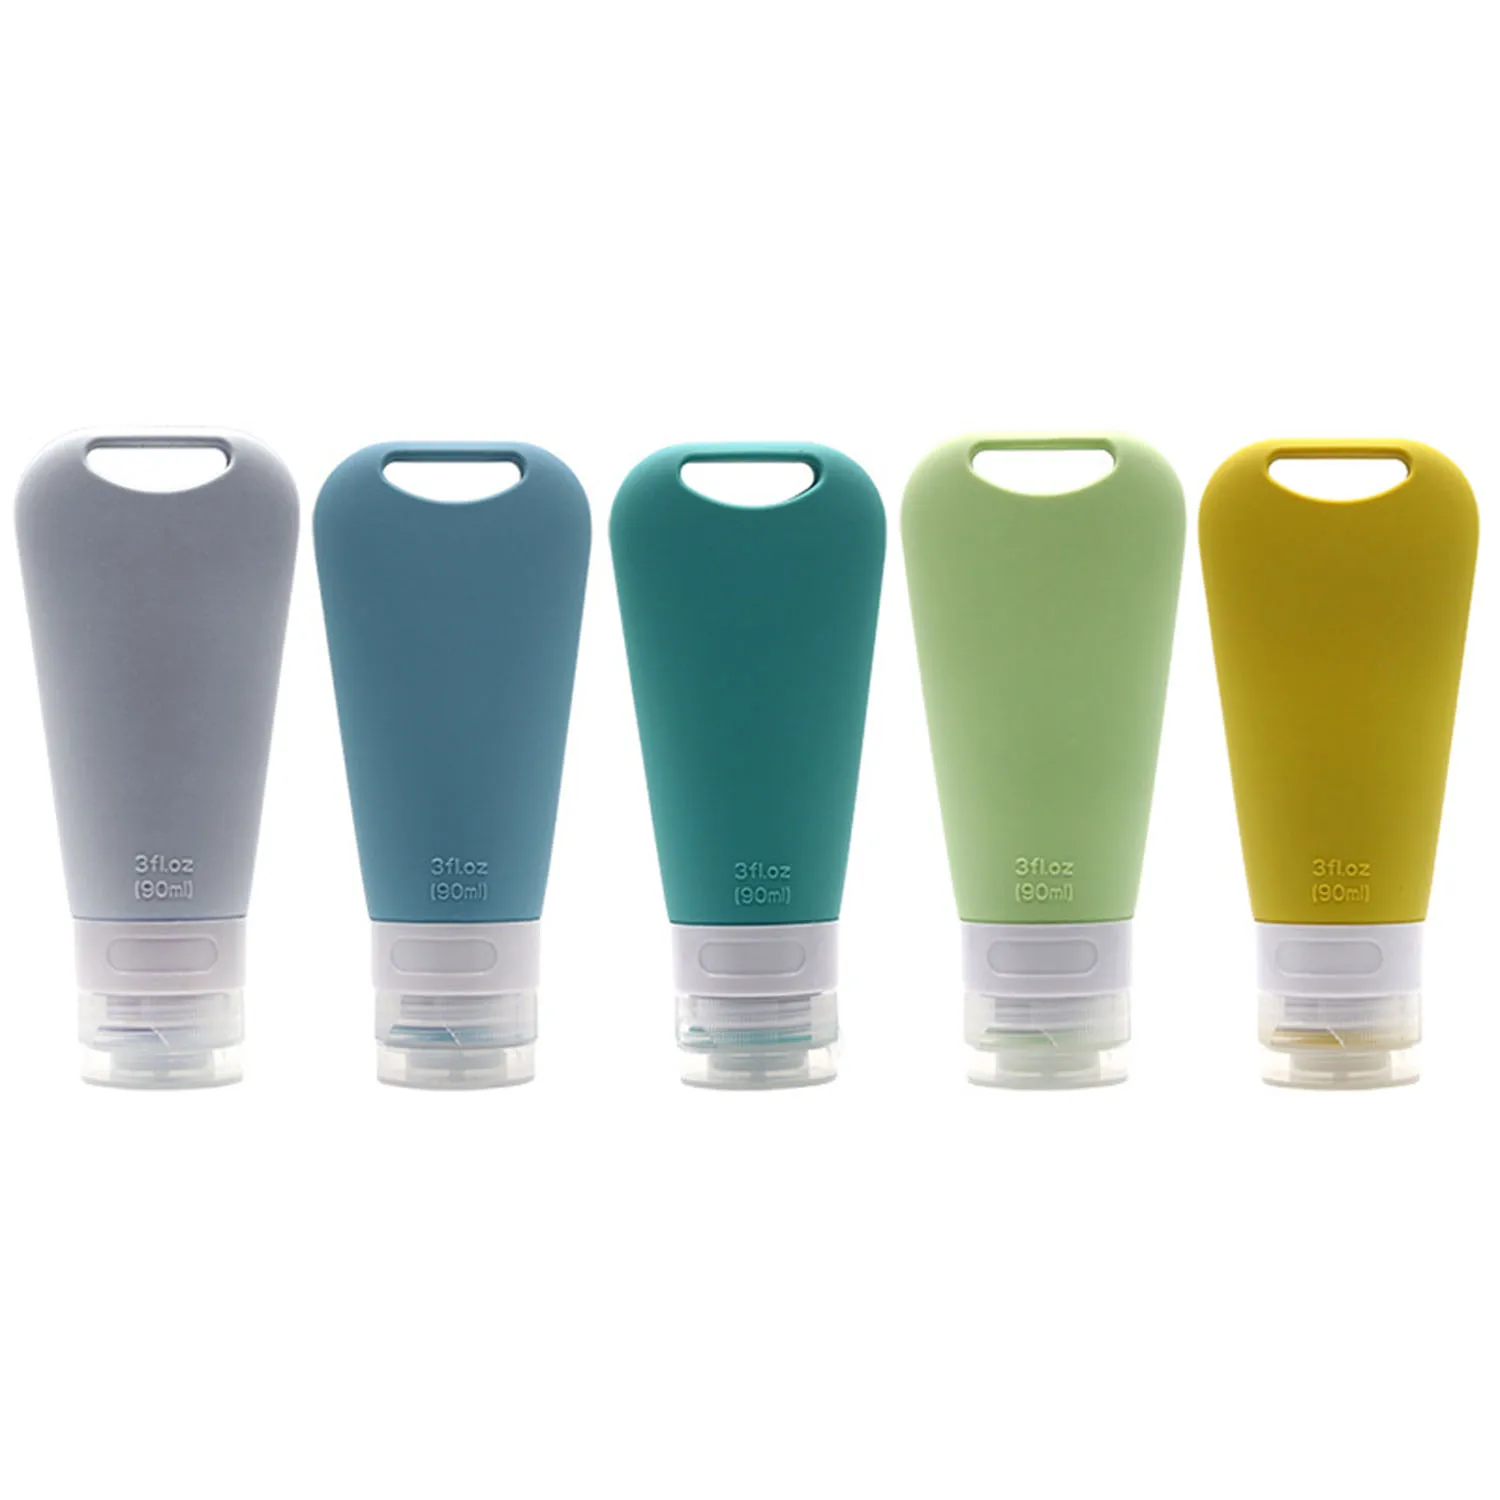 Silicone Travel Bottles for Toiletries TSA Approved Travel Containers Set  Portable Leak Proof Refillable Cosmetic Bottles silicone travel bottles for toiletries tsa approved travel containers set portable leak proof refillable cosmetic bottles